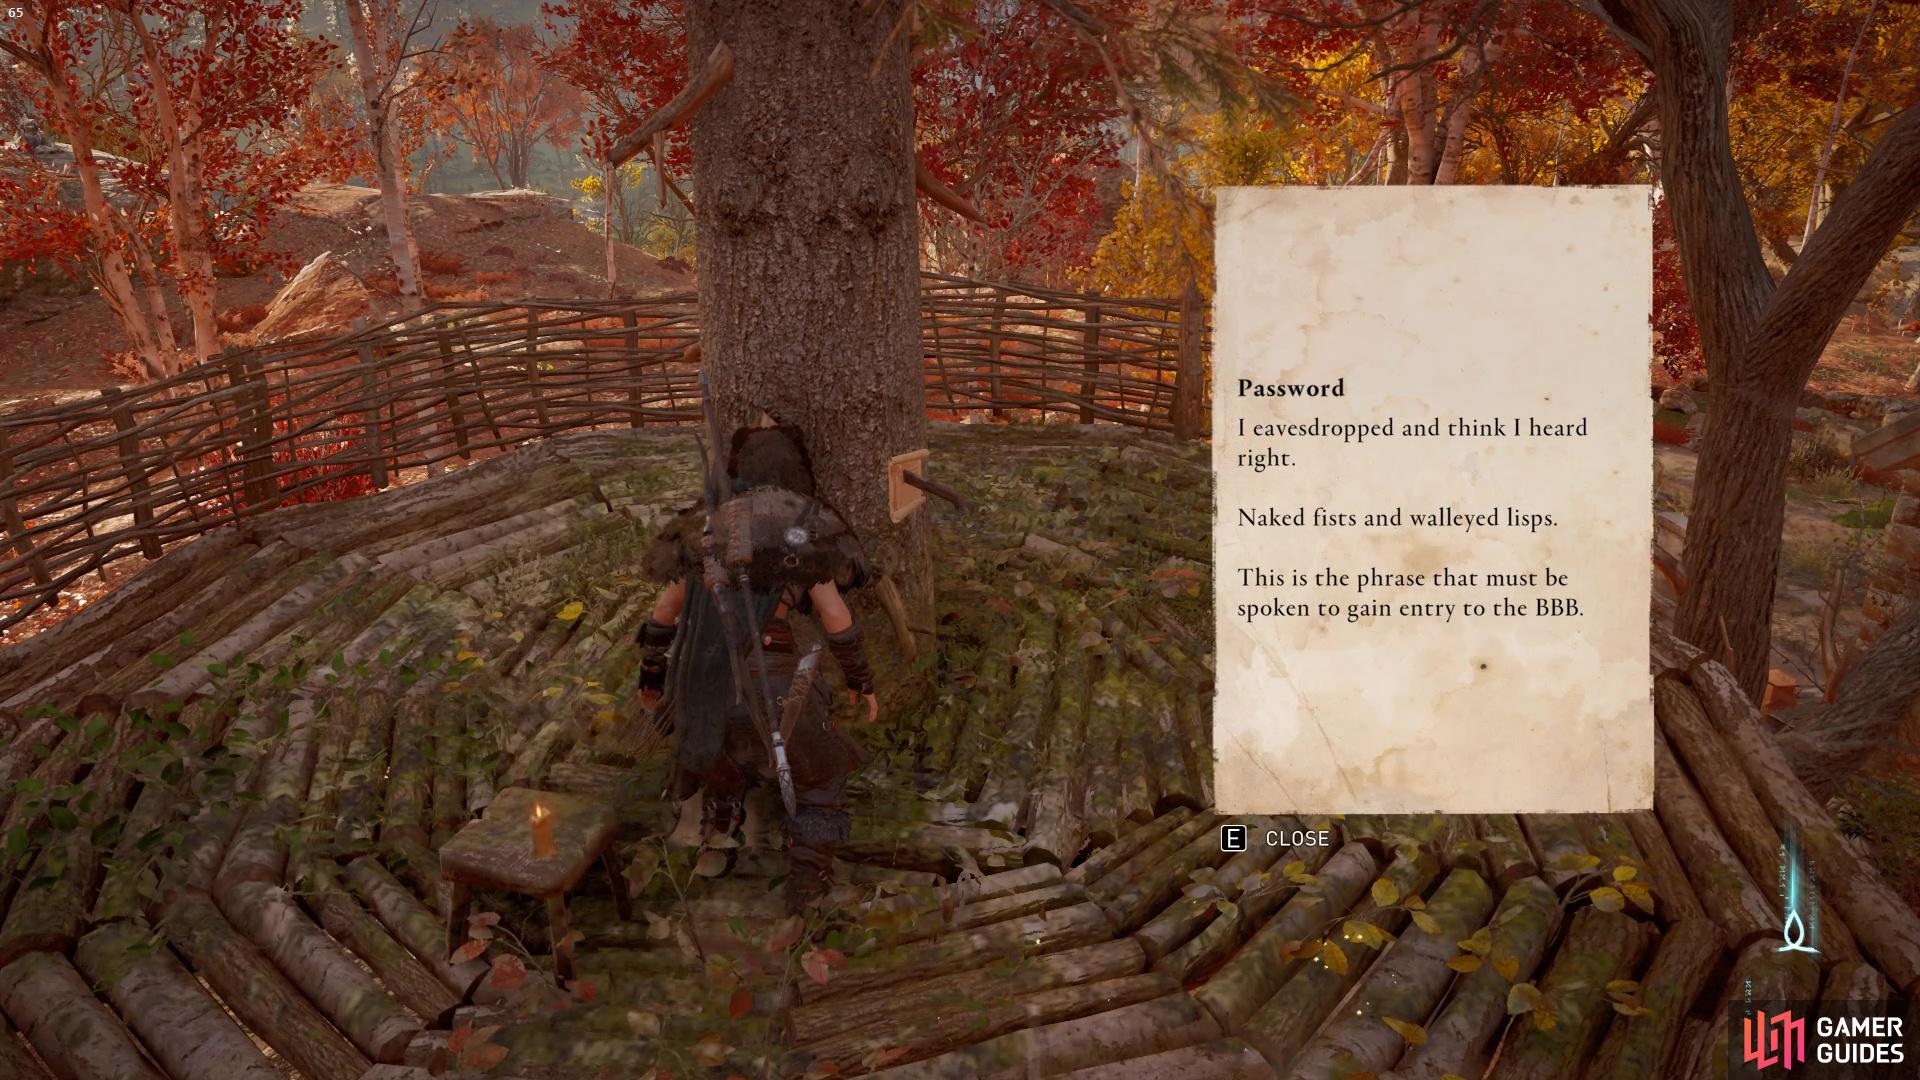 You can find the password you need pinned to the tree above the crow's nest. 